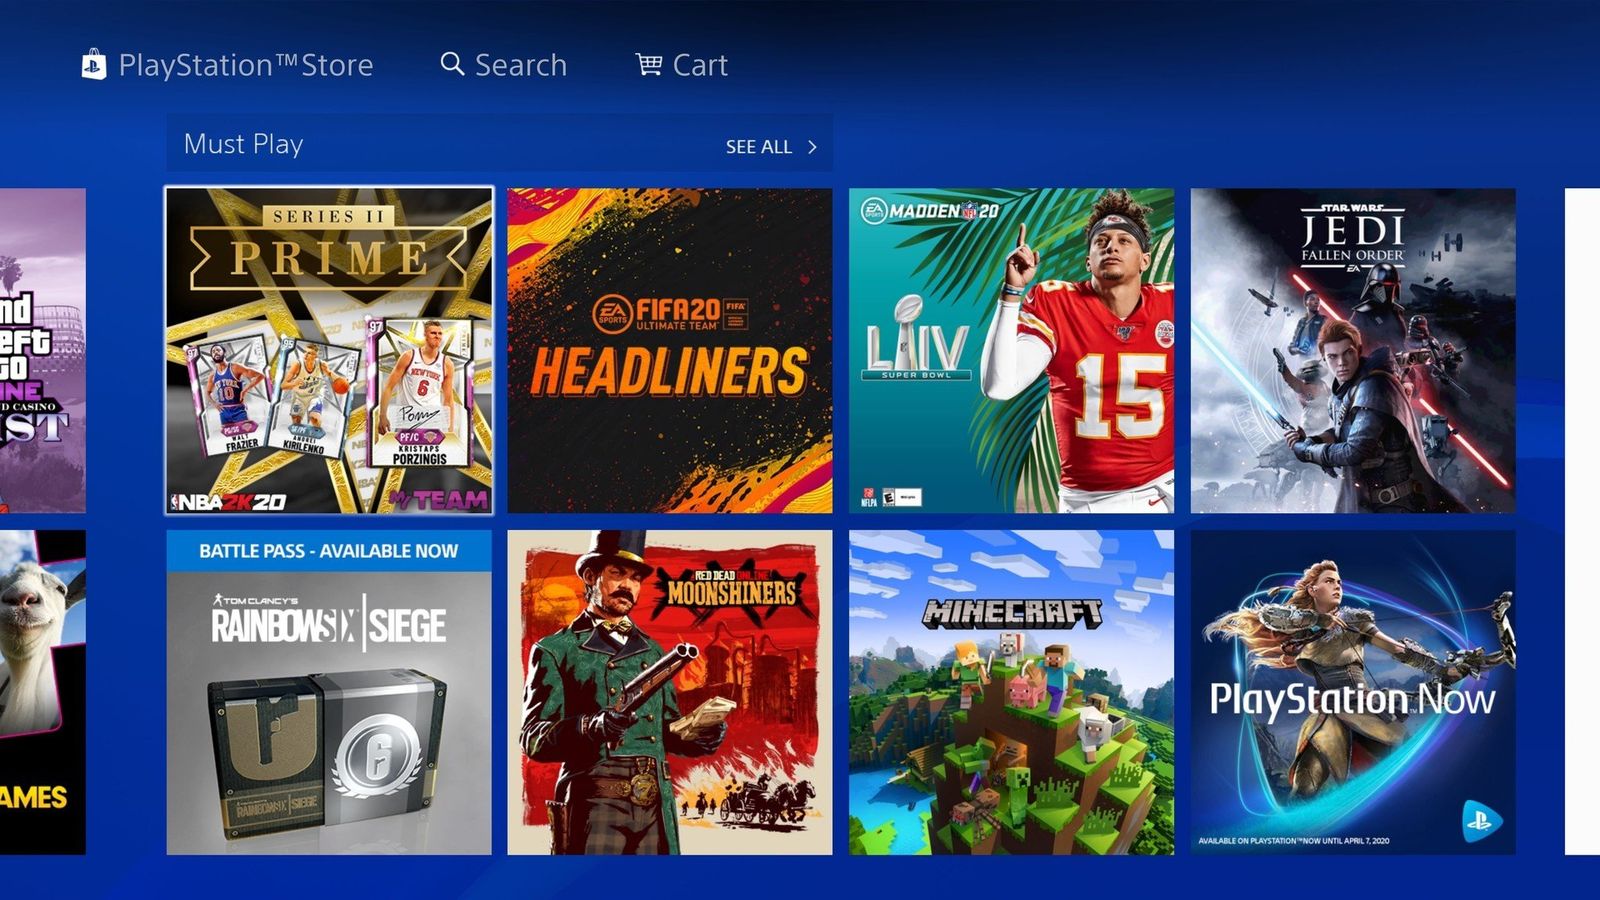 sony ps4 play store